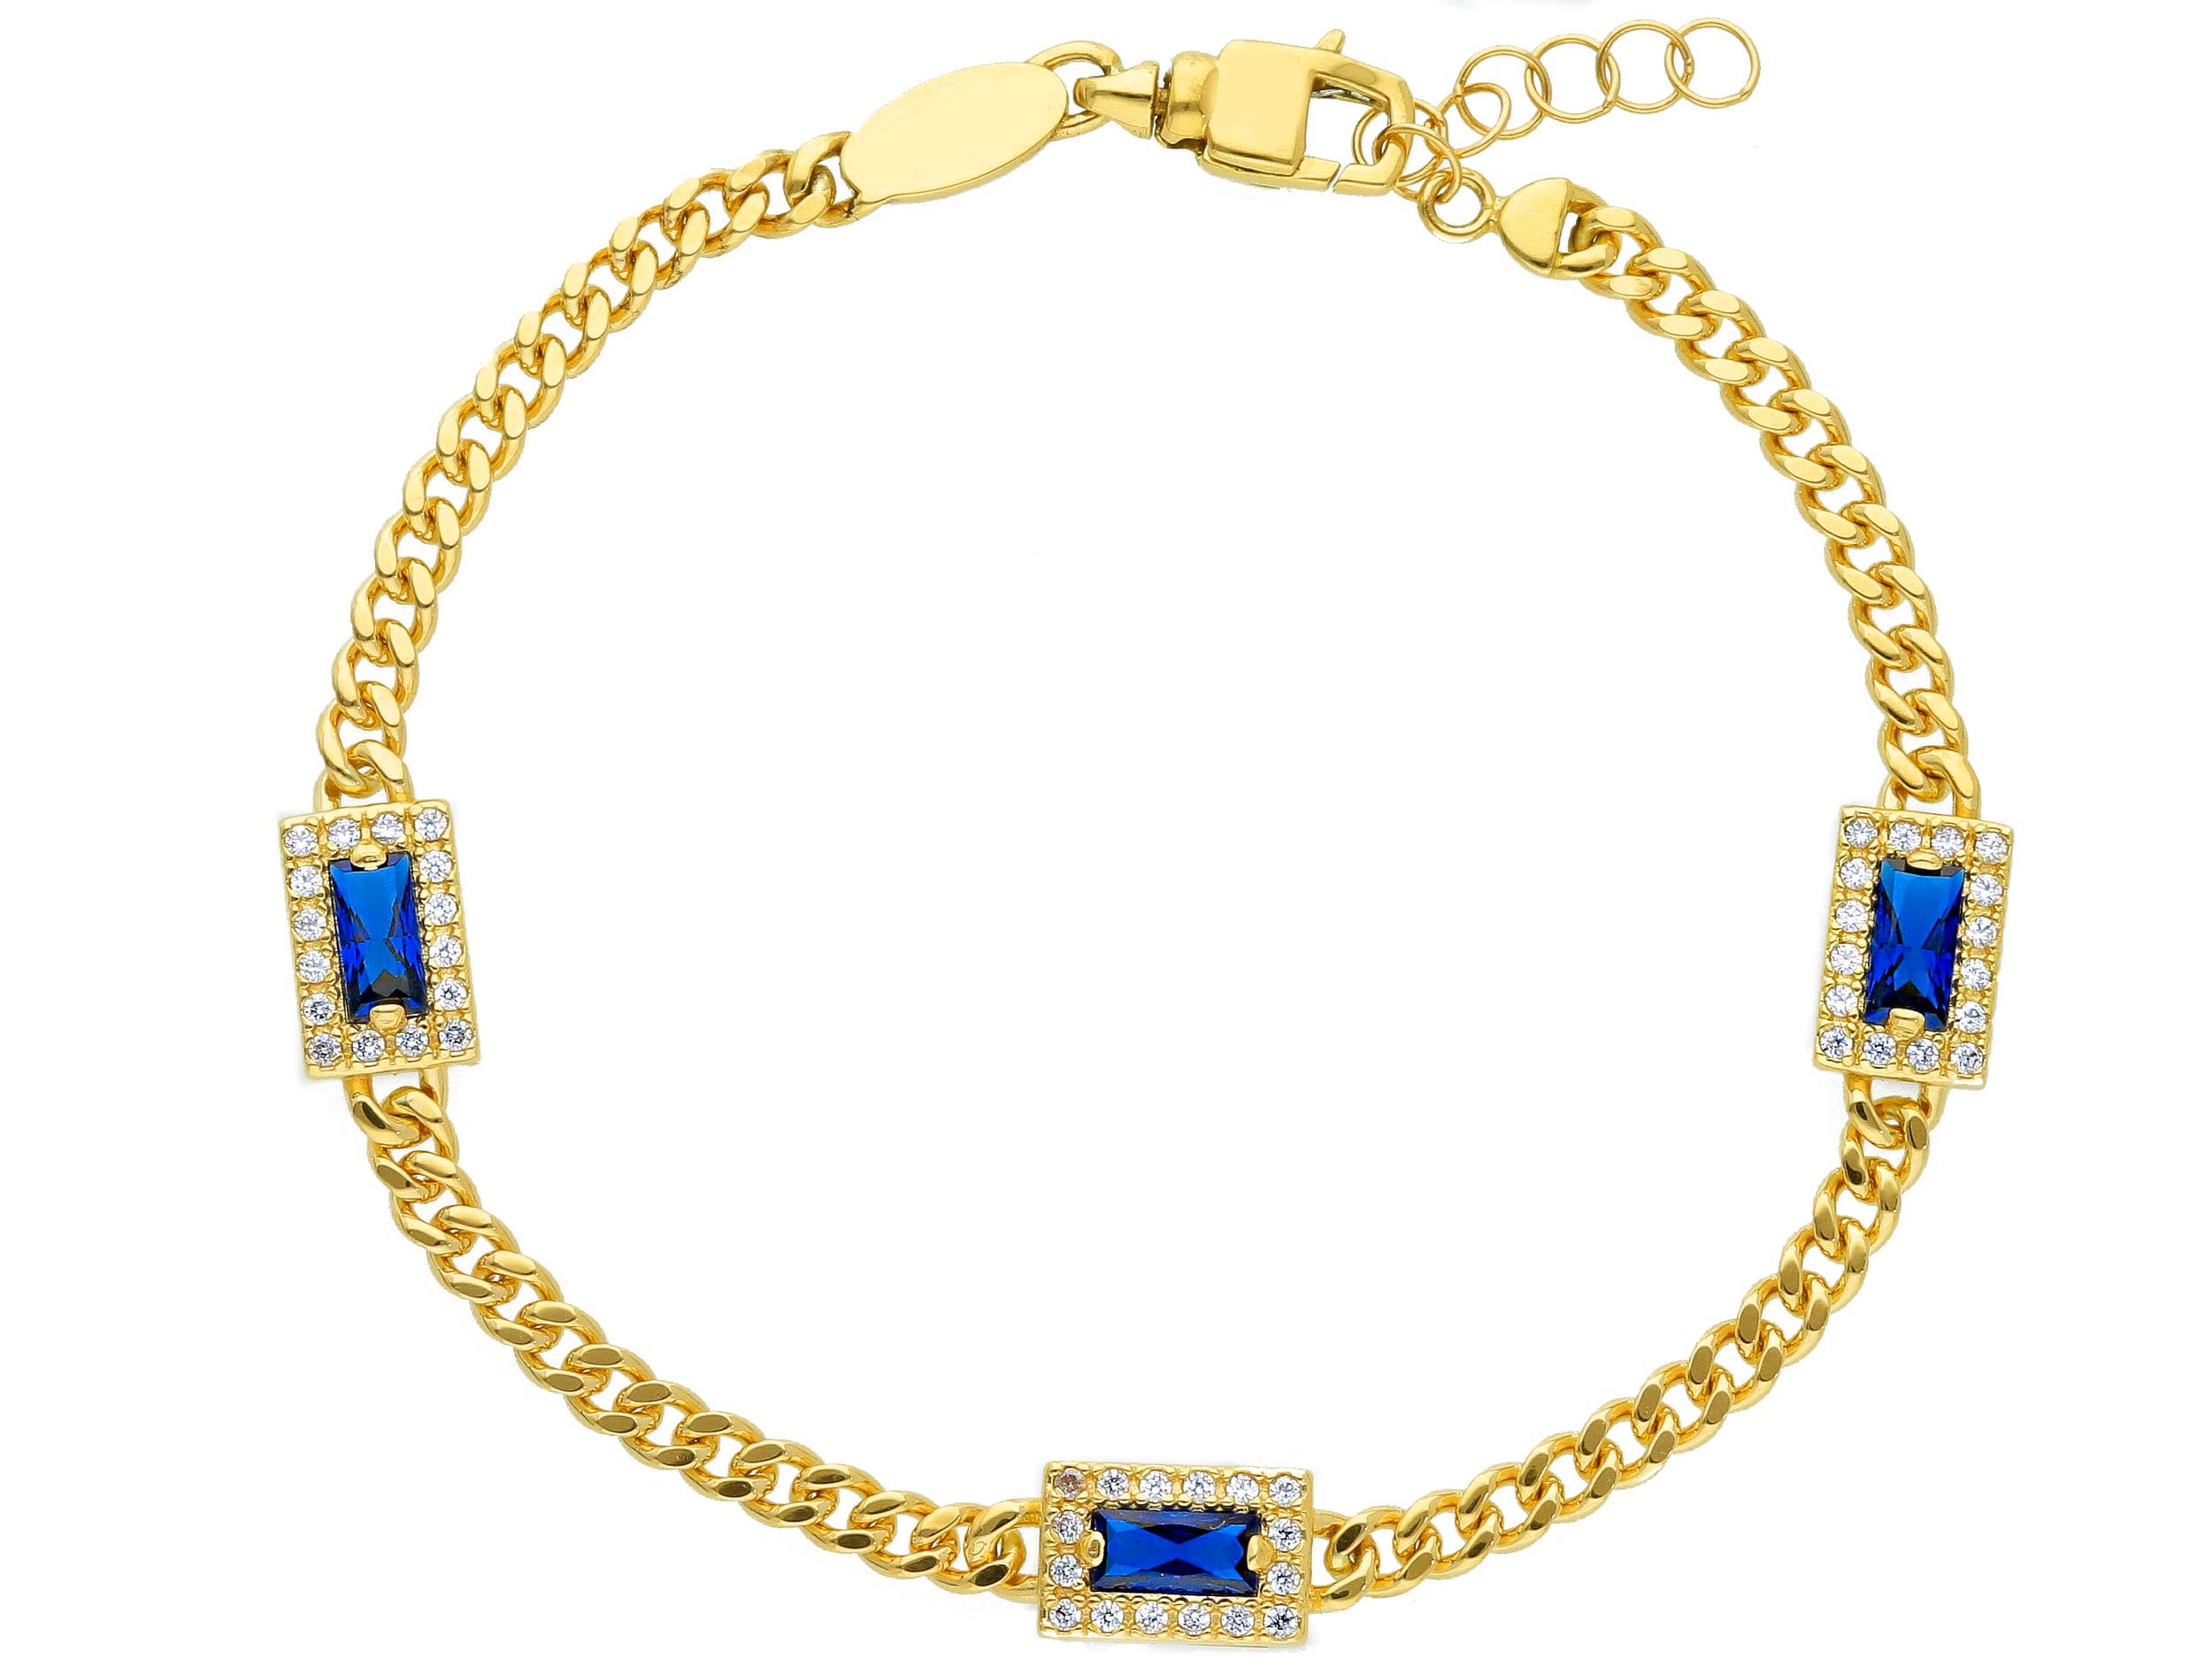 Beautiful 18ct Yellow Gold Chain Links Bracelet With Cubic Zirconia